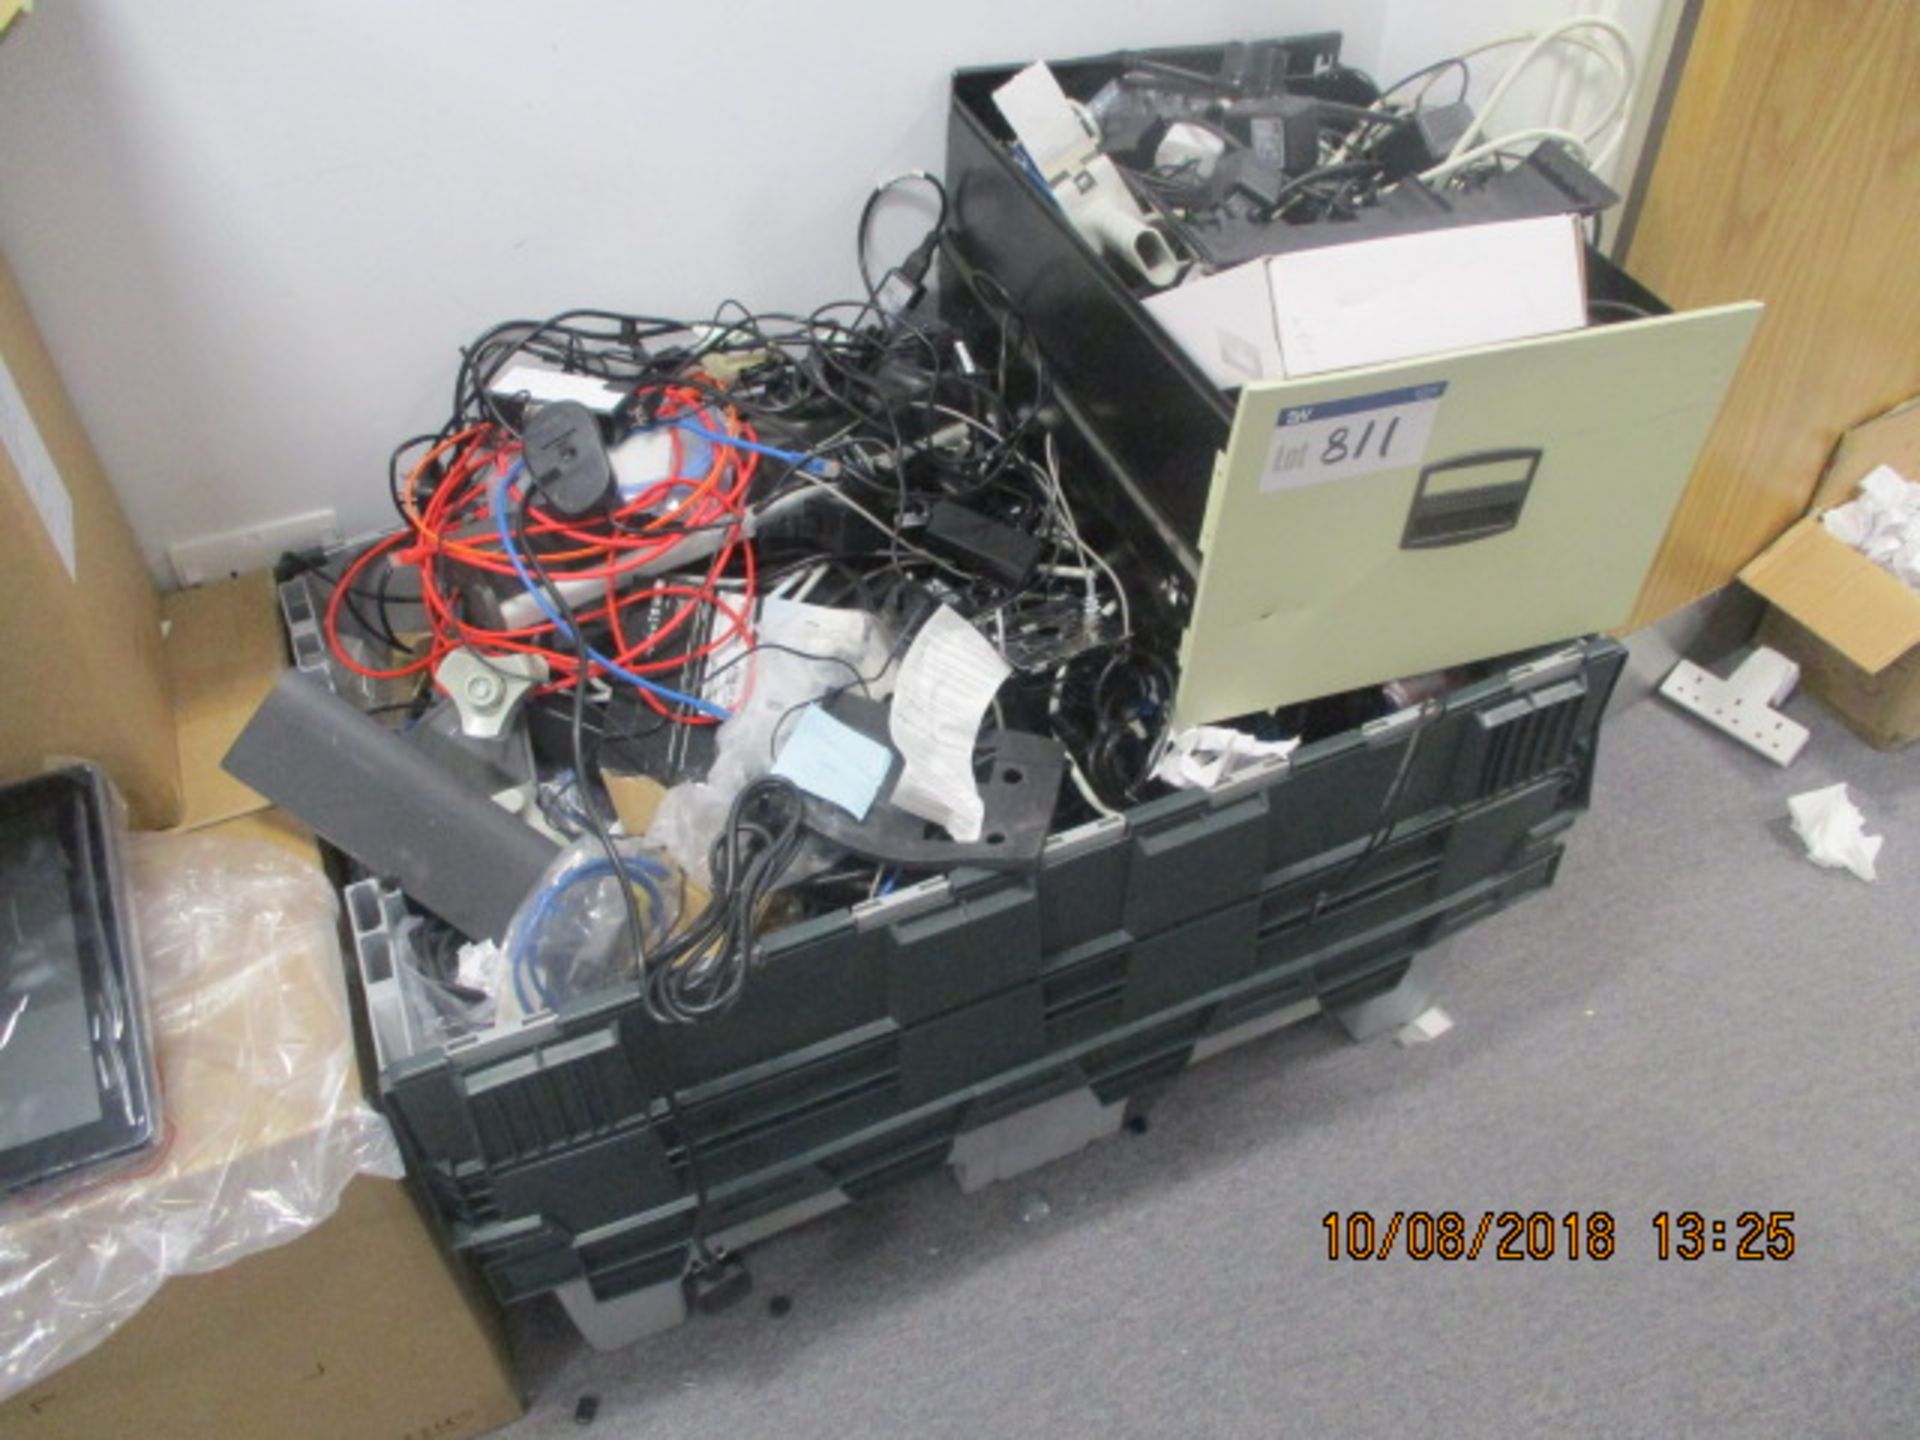 Assorted Computer Electrical Equipment, as set out